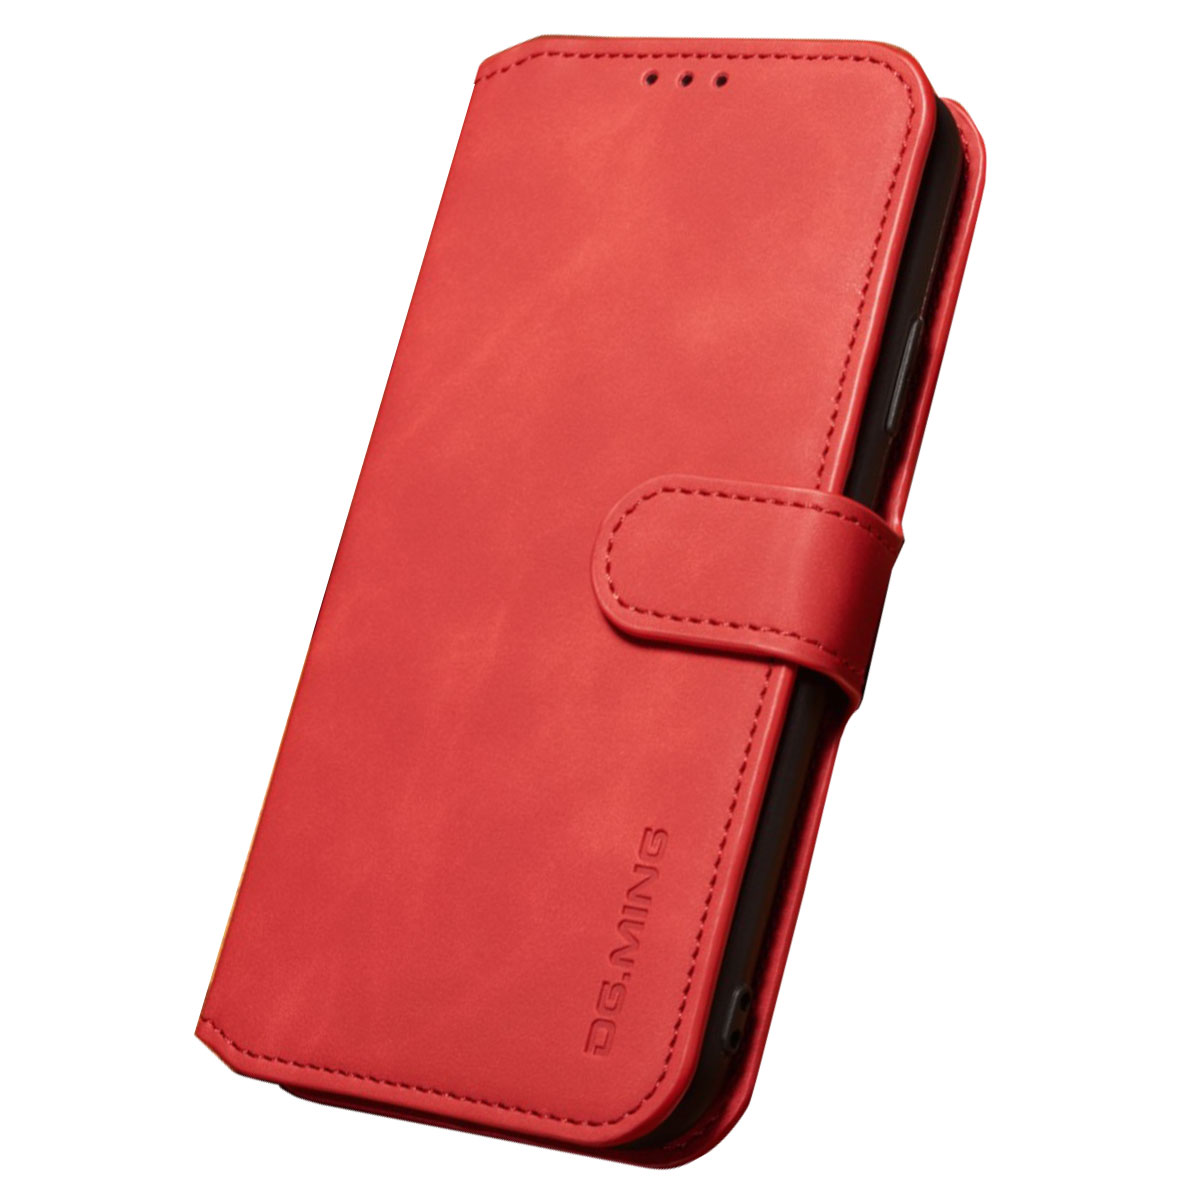 Husa iPhone XR Retro Style Leather, Dg.Ming Rosie thumb